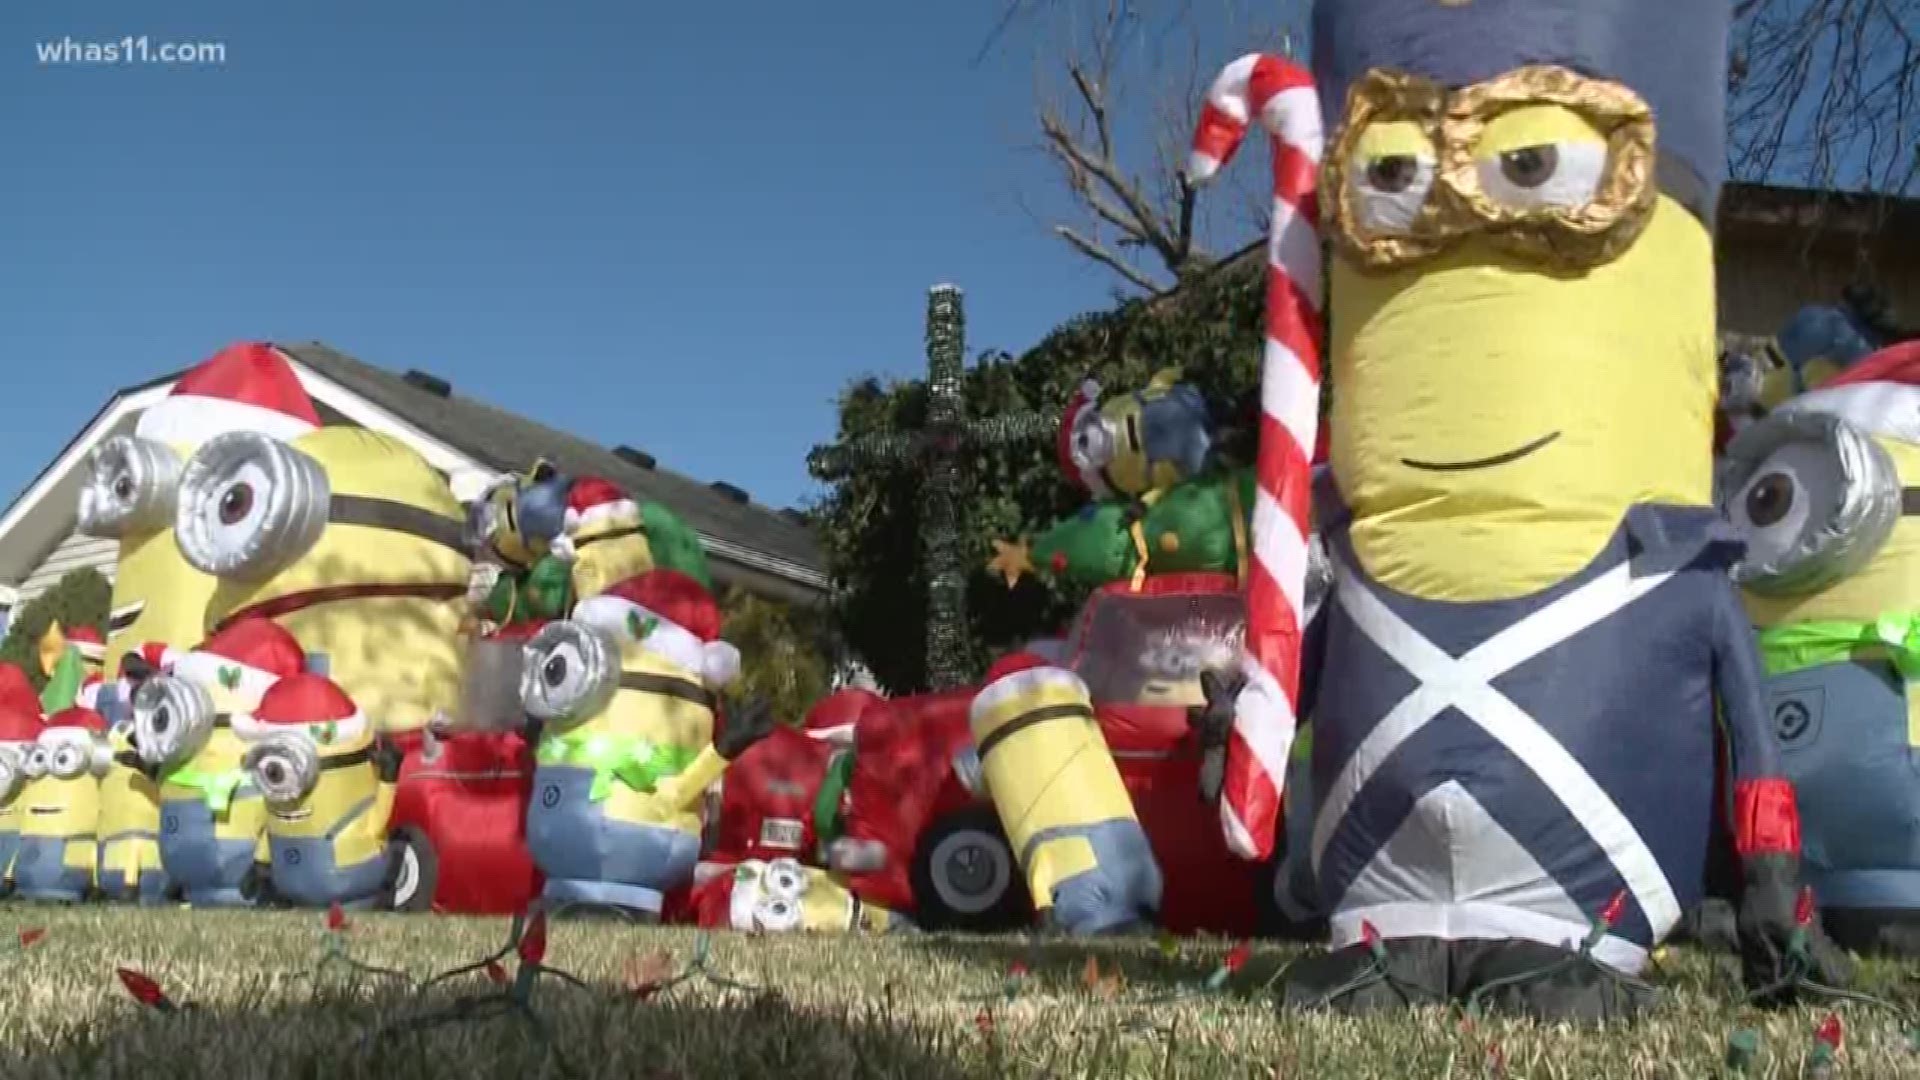 A local holiday display is turning heads across the globe thanks to the power of social media.Now the New Albany neighborhood is experiencing Minion mania as everyone tries to get a look.